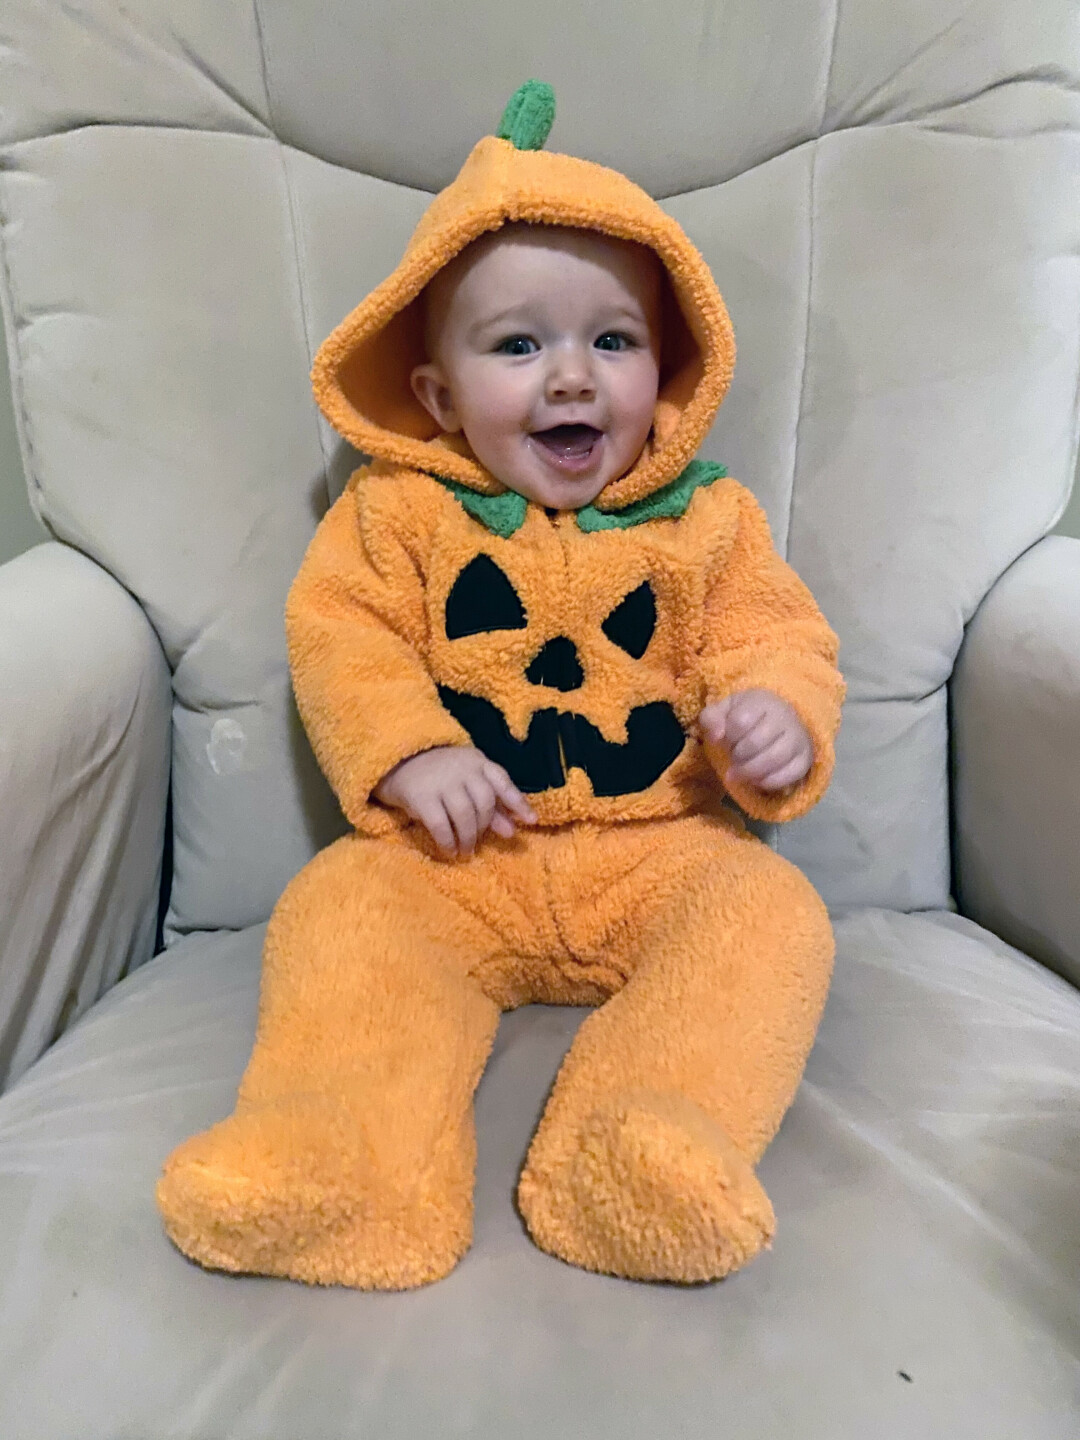 This cutie, Emma Reed, is all dressed up for her first Halloween!